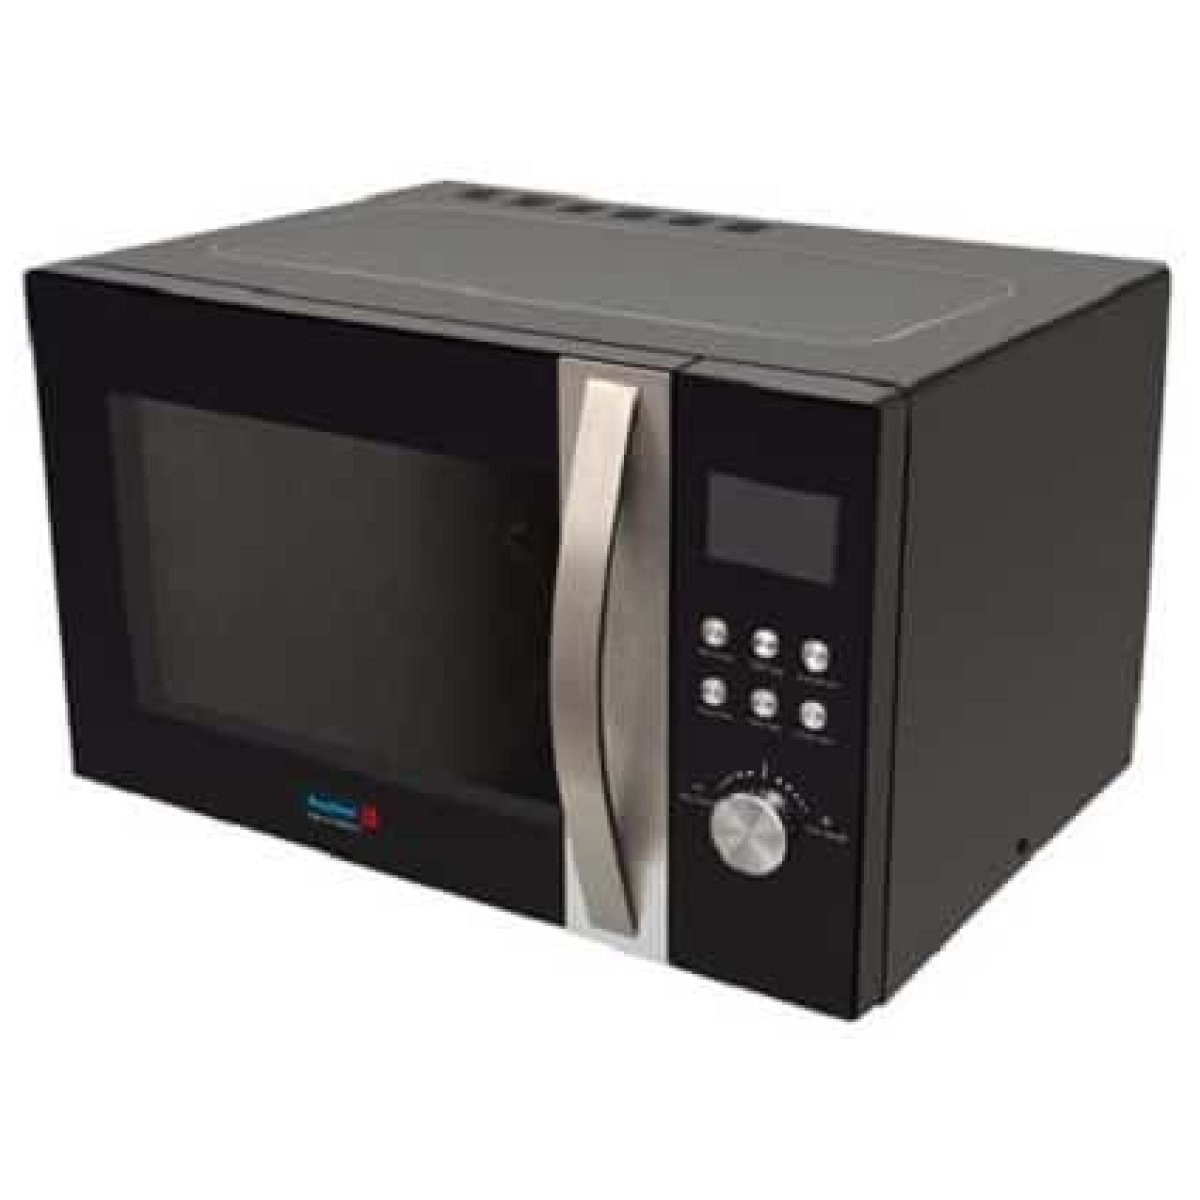 Scanfrost SF-34 - 34 LITERS Microwave WITH GRILL